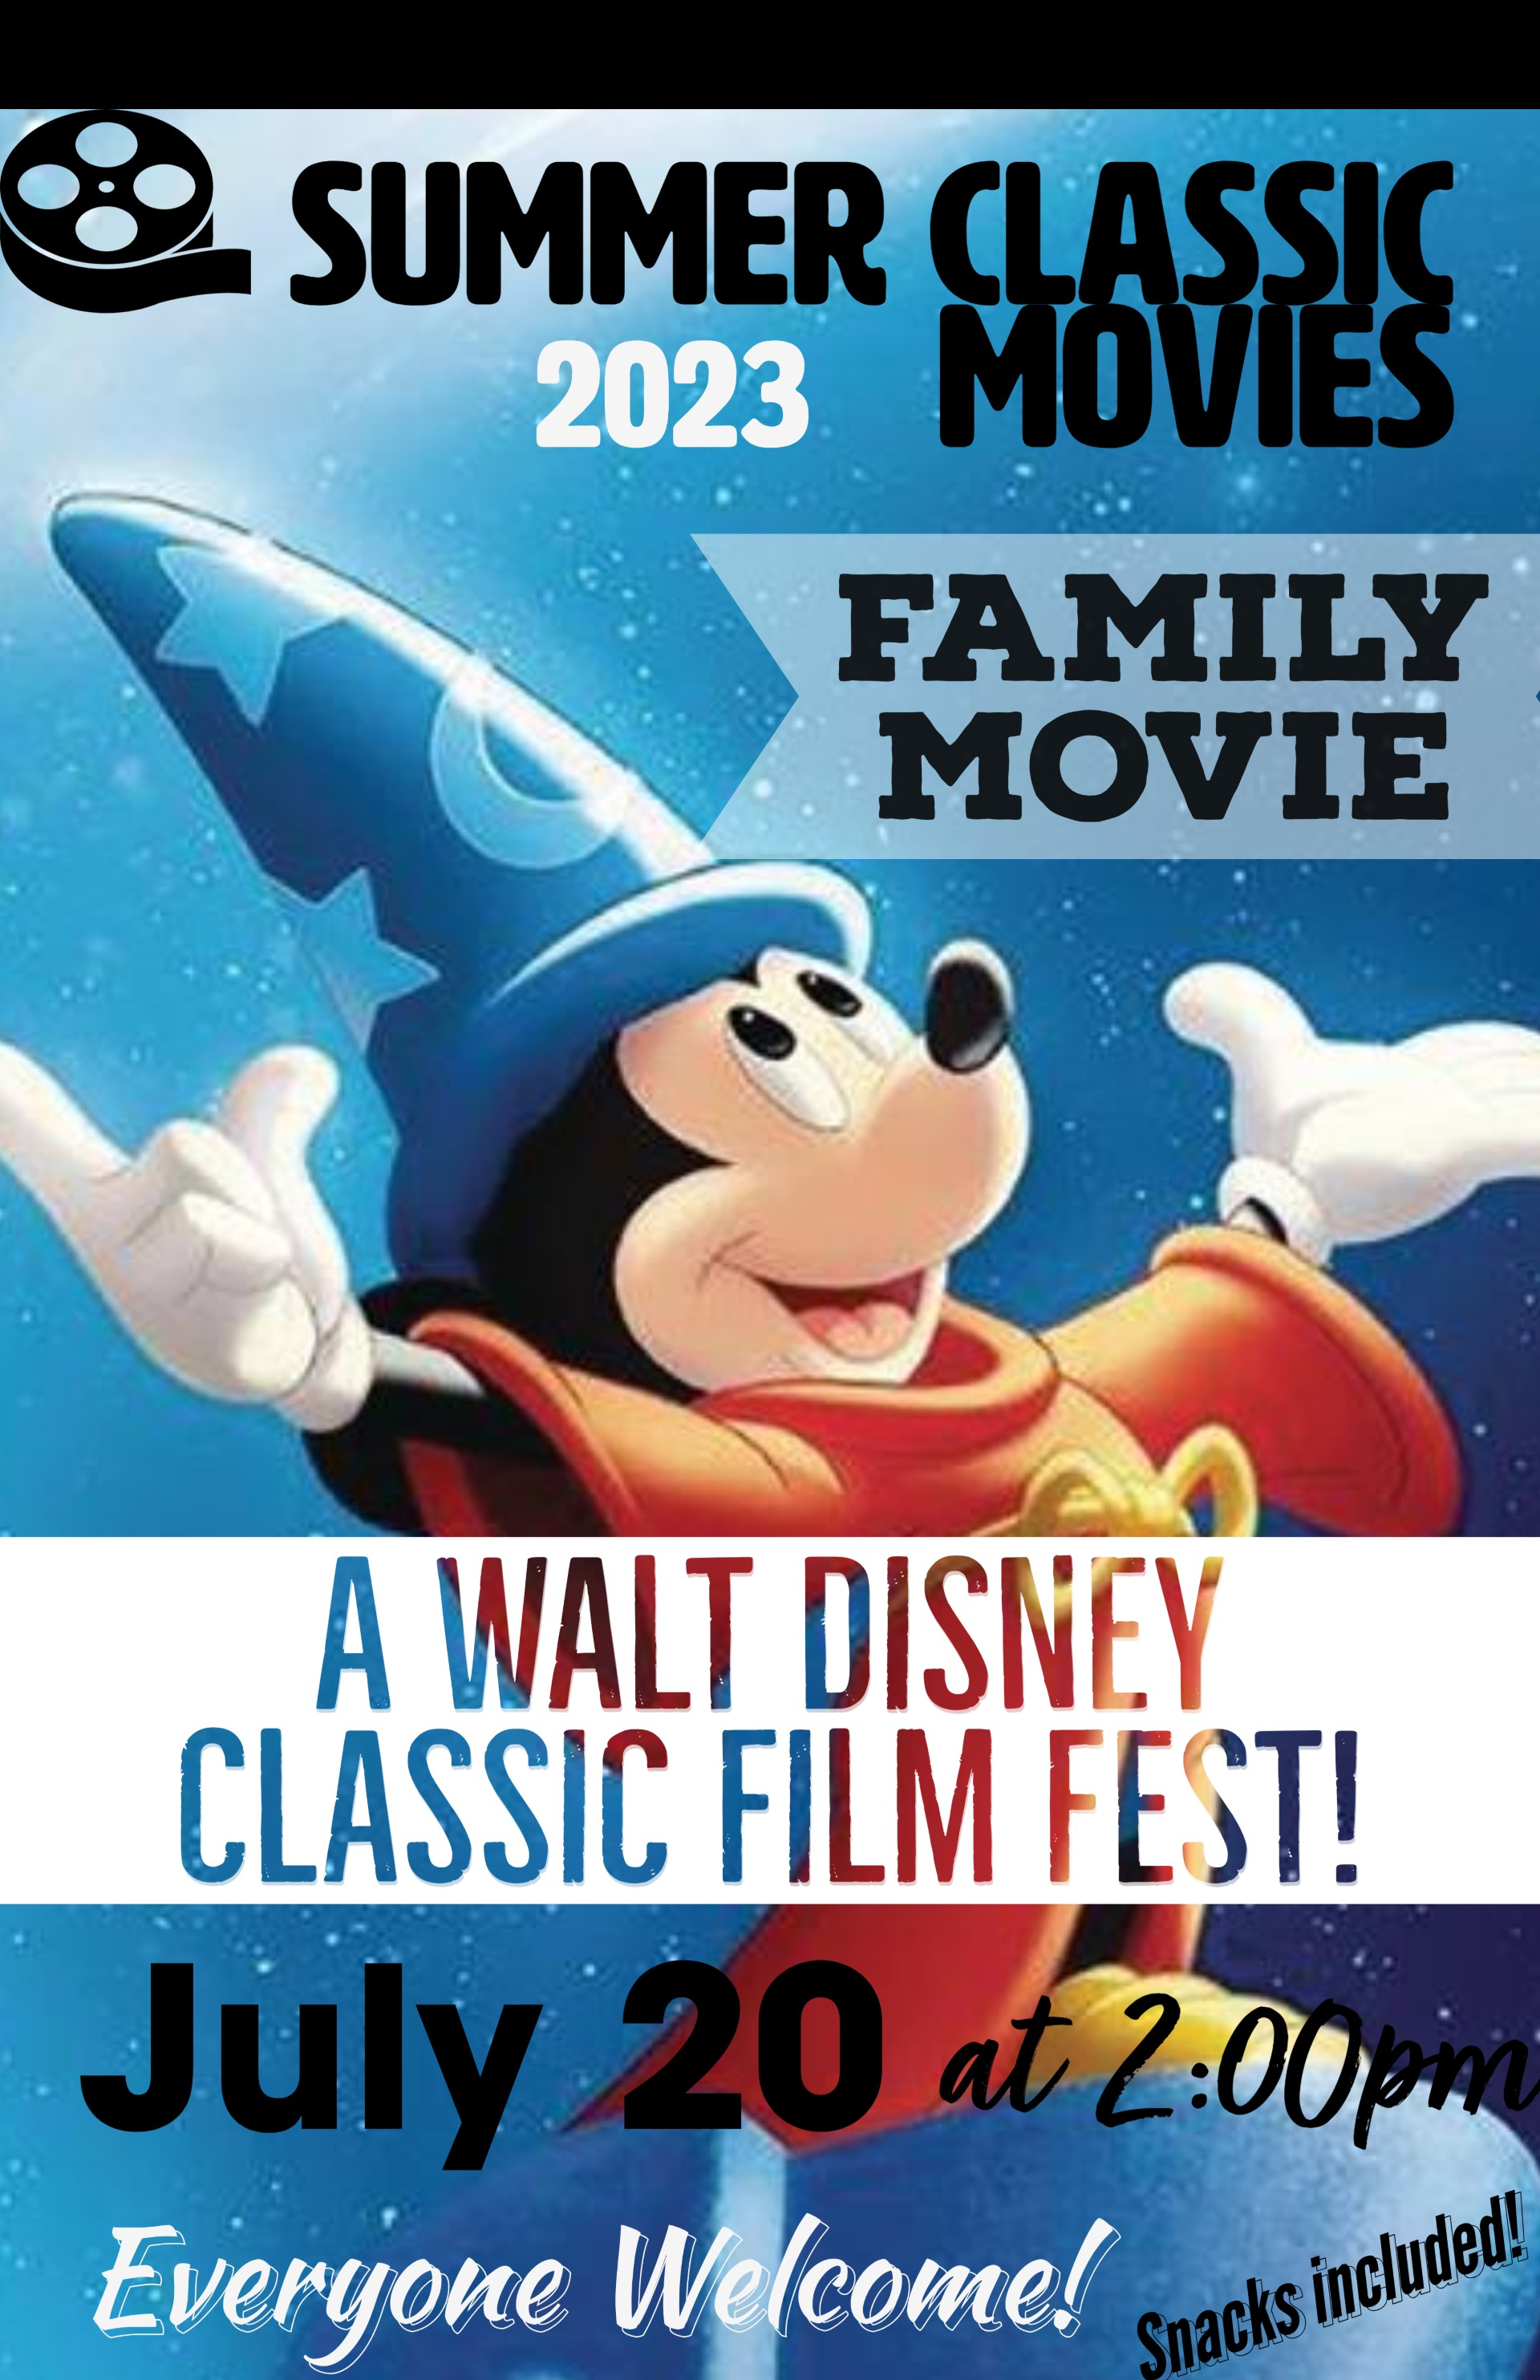 Summer Classic Movies Family Film Afternoon